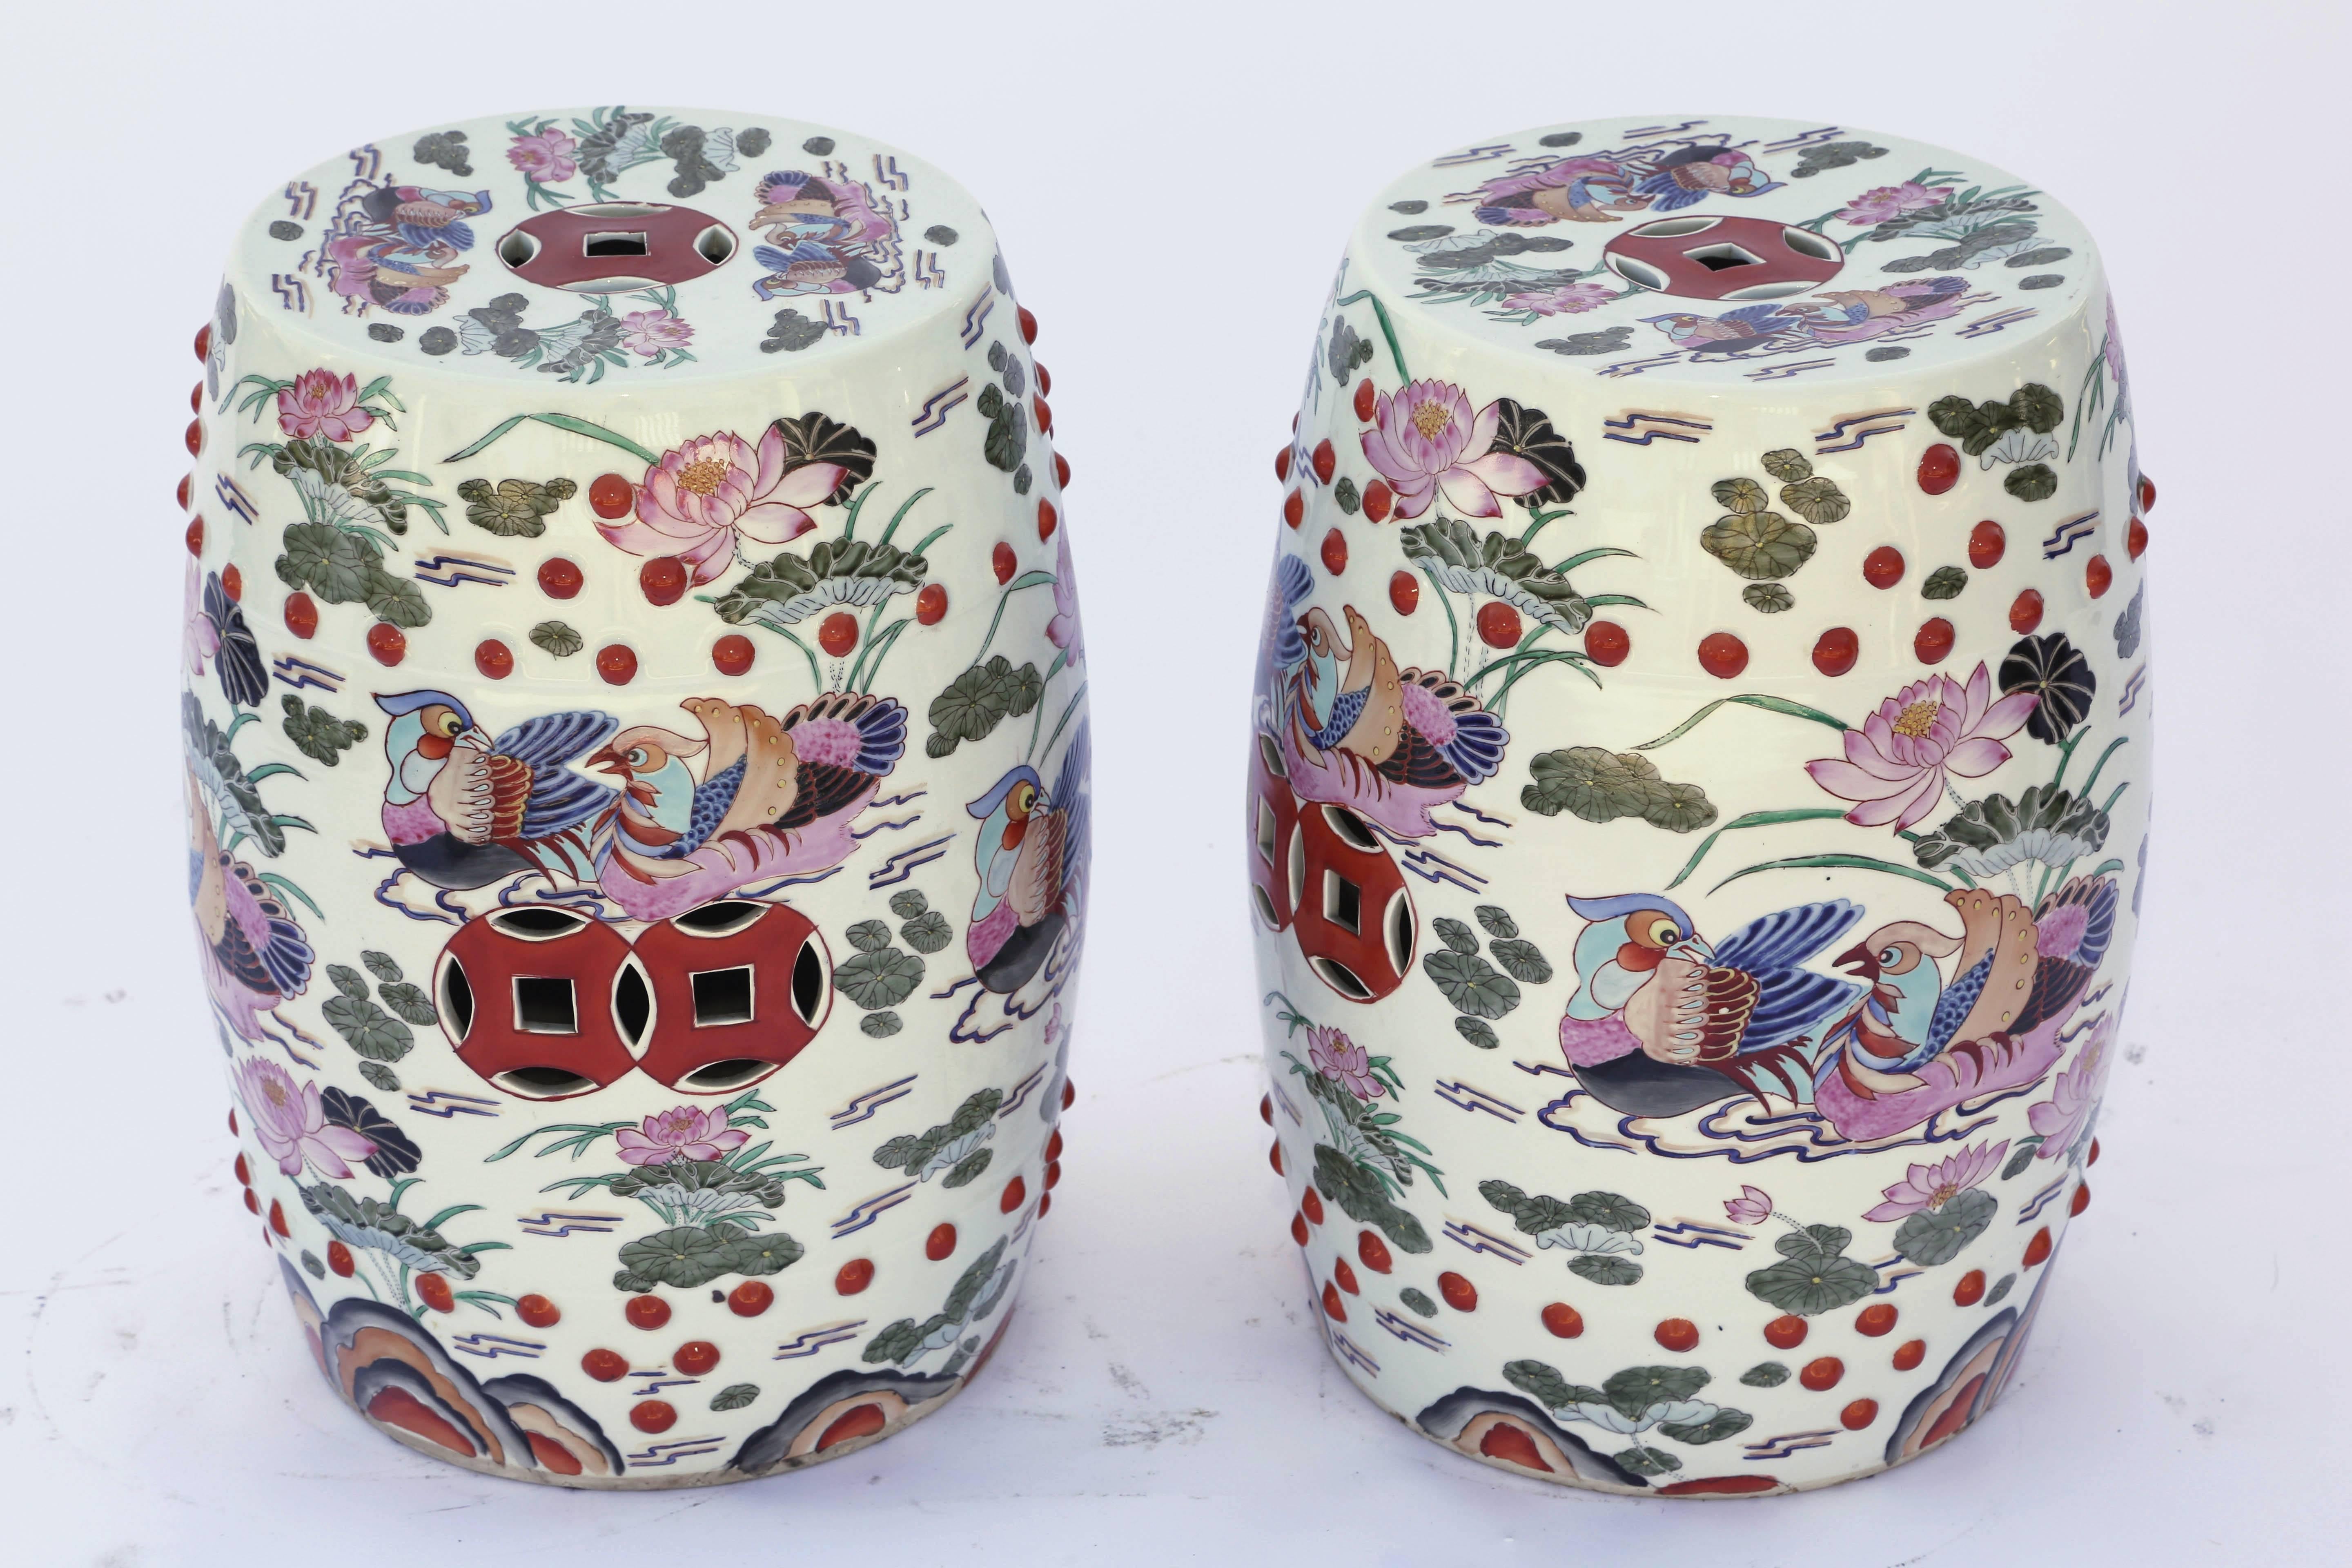 Pair of Hand-Painted Chinese Porcelain Drum Stools 1